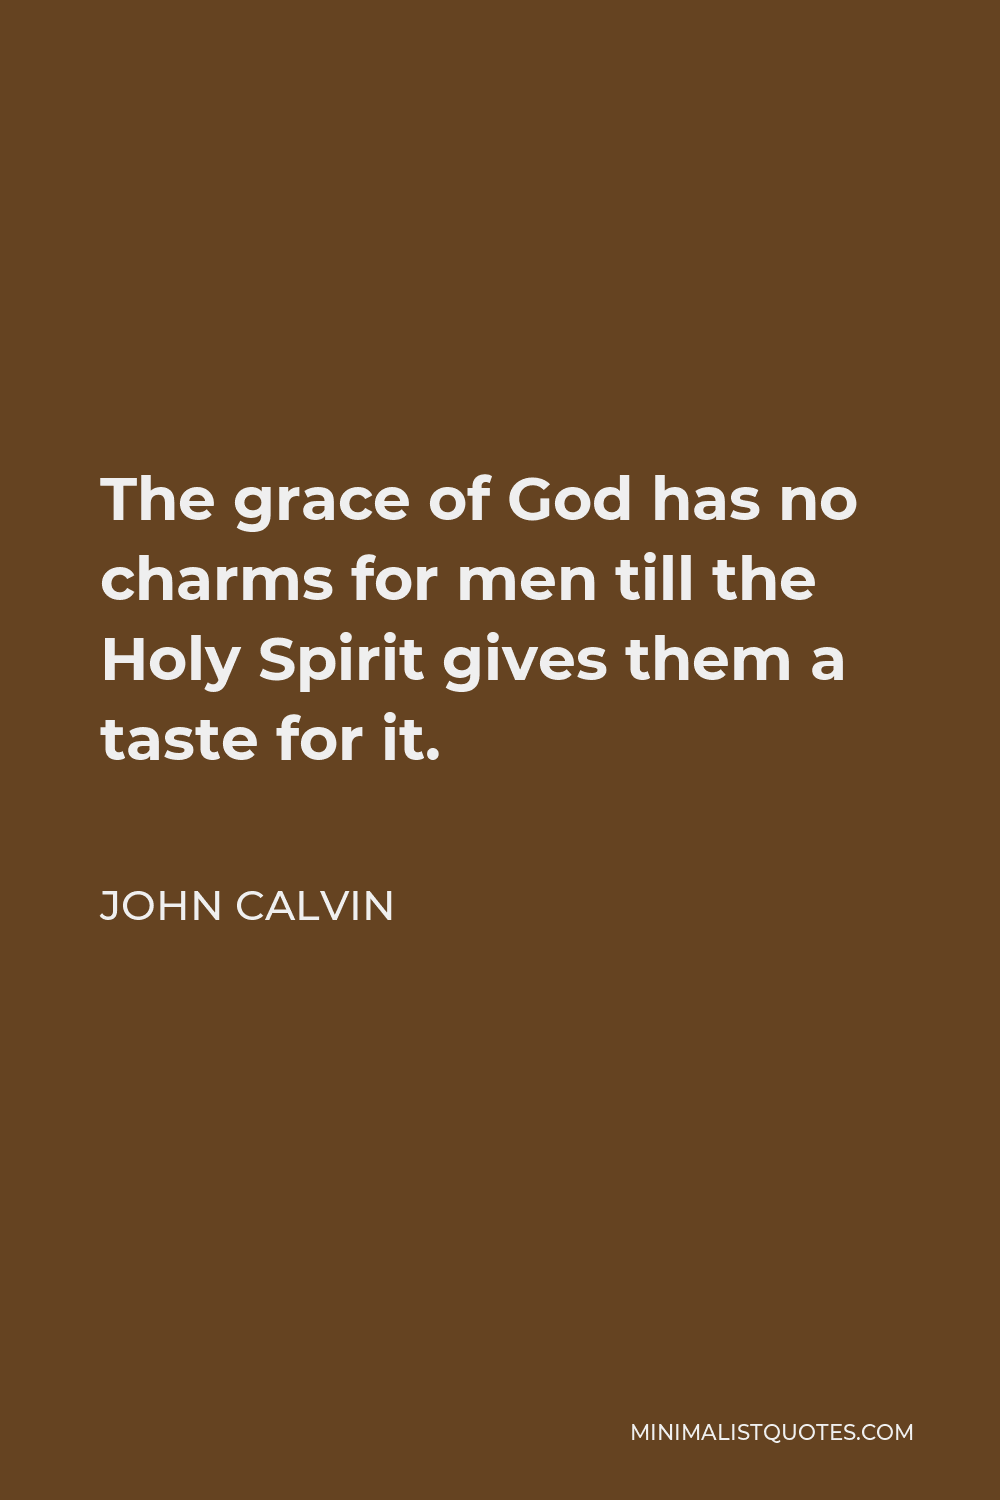 John Calvin Quote - The grace of God has no charms for men till the Holy Spirit gives them a taste for it.